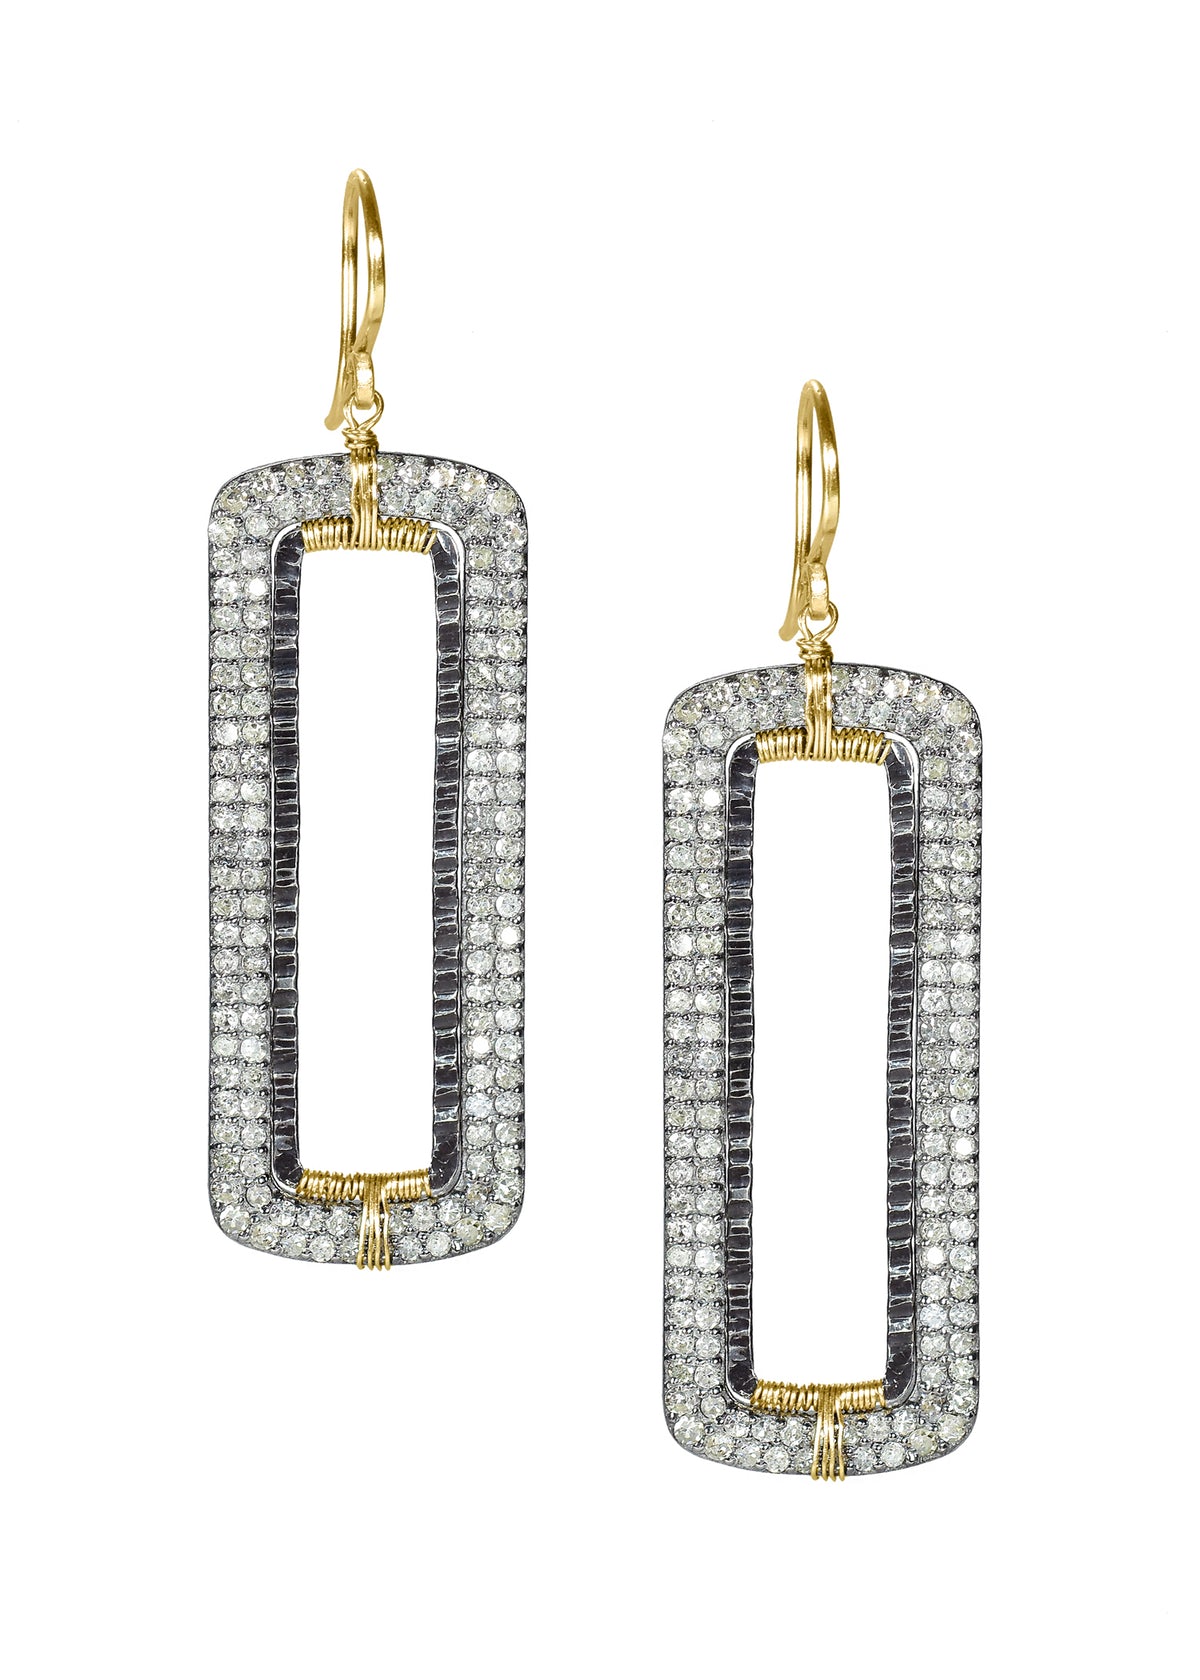 Diamond 14k gold Sterling silver Mixed metal Earrings measure 2&quot; in length (including the ear wires) and 5/8&quot; in width Handmade in our Los Angeles studio